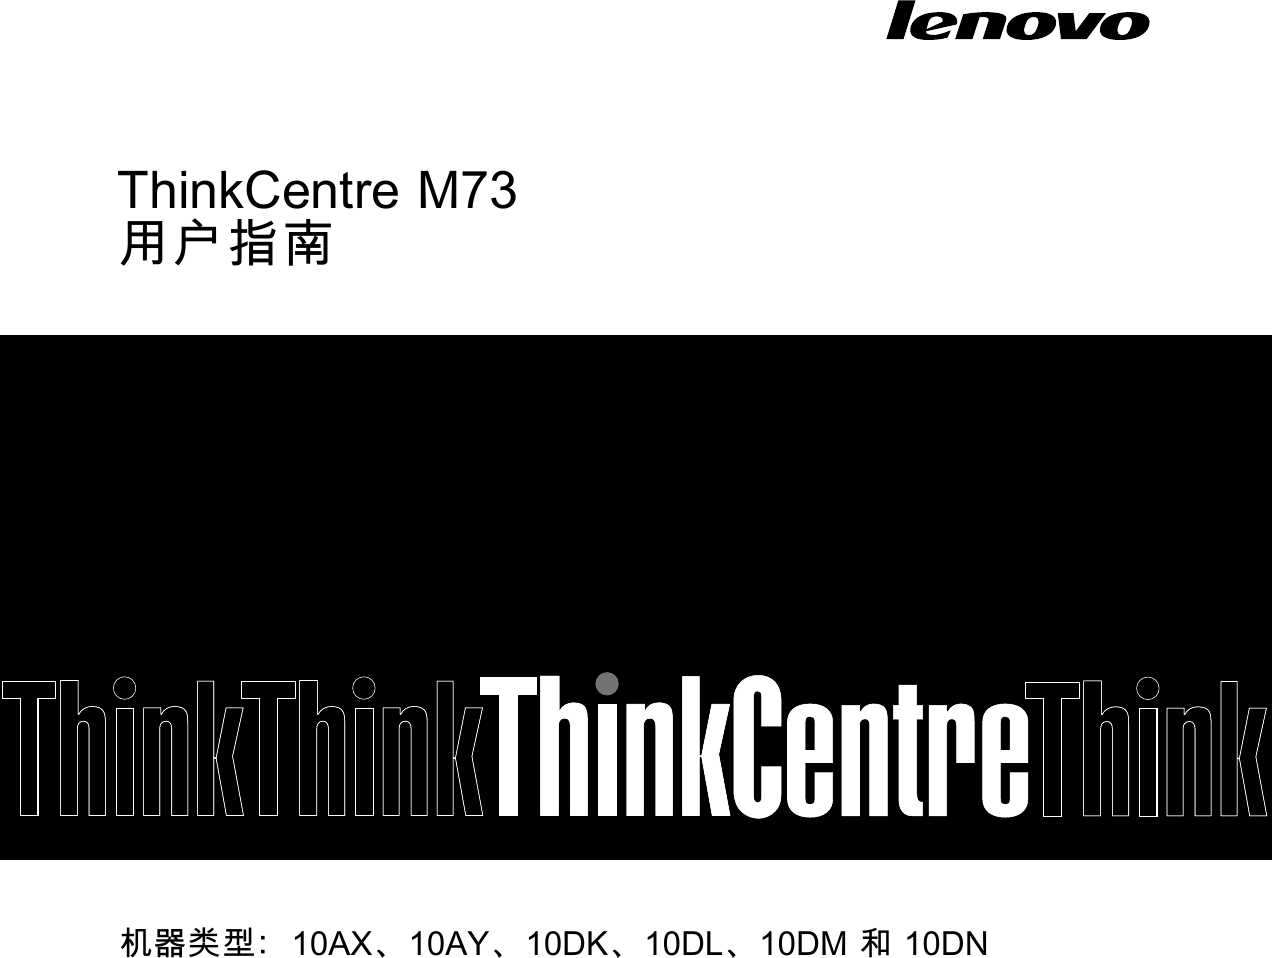 Lenovo M73 Tiny Ug Zh Cn 使用手册 Chinese Simplified User Guide Tiny Form Factor Desktop Think Centre Type 10ay